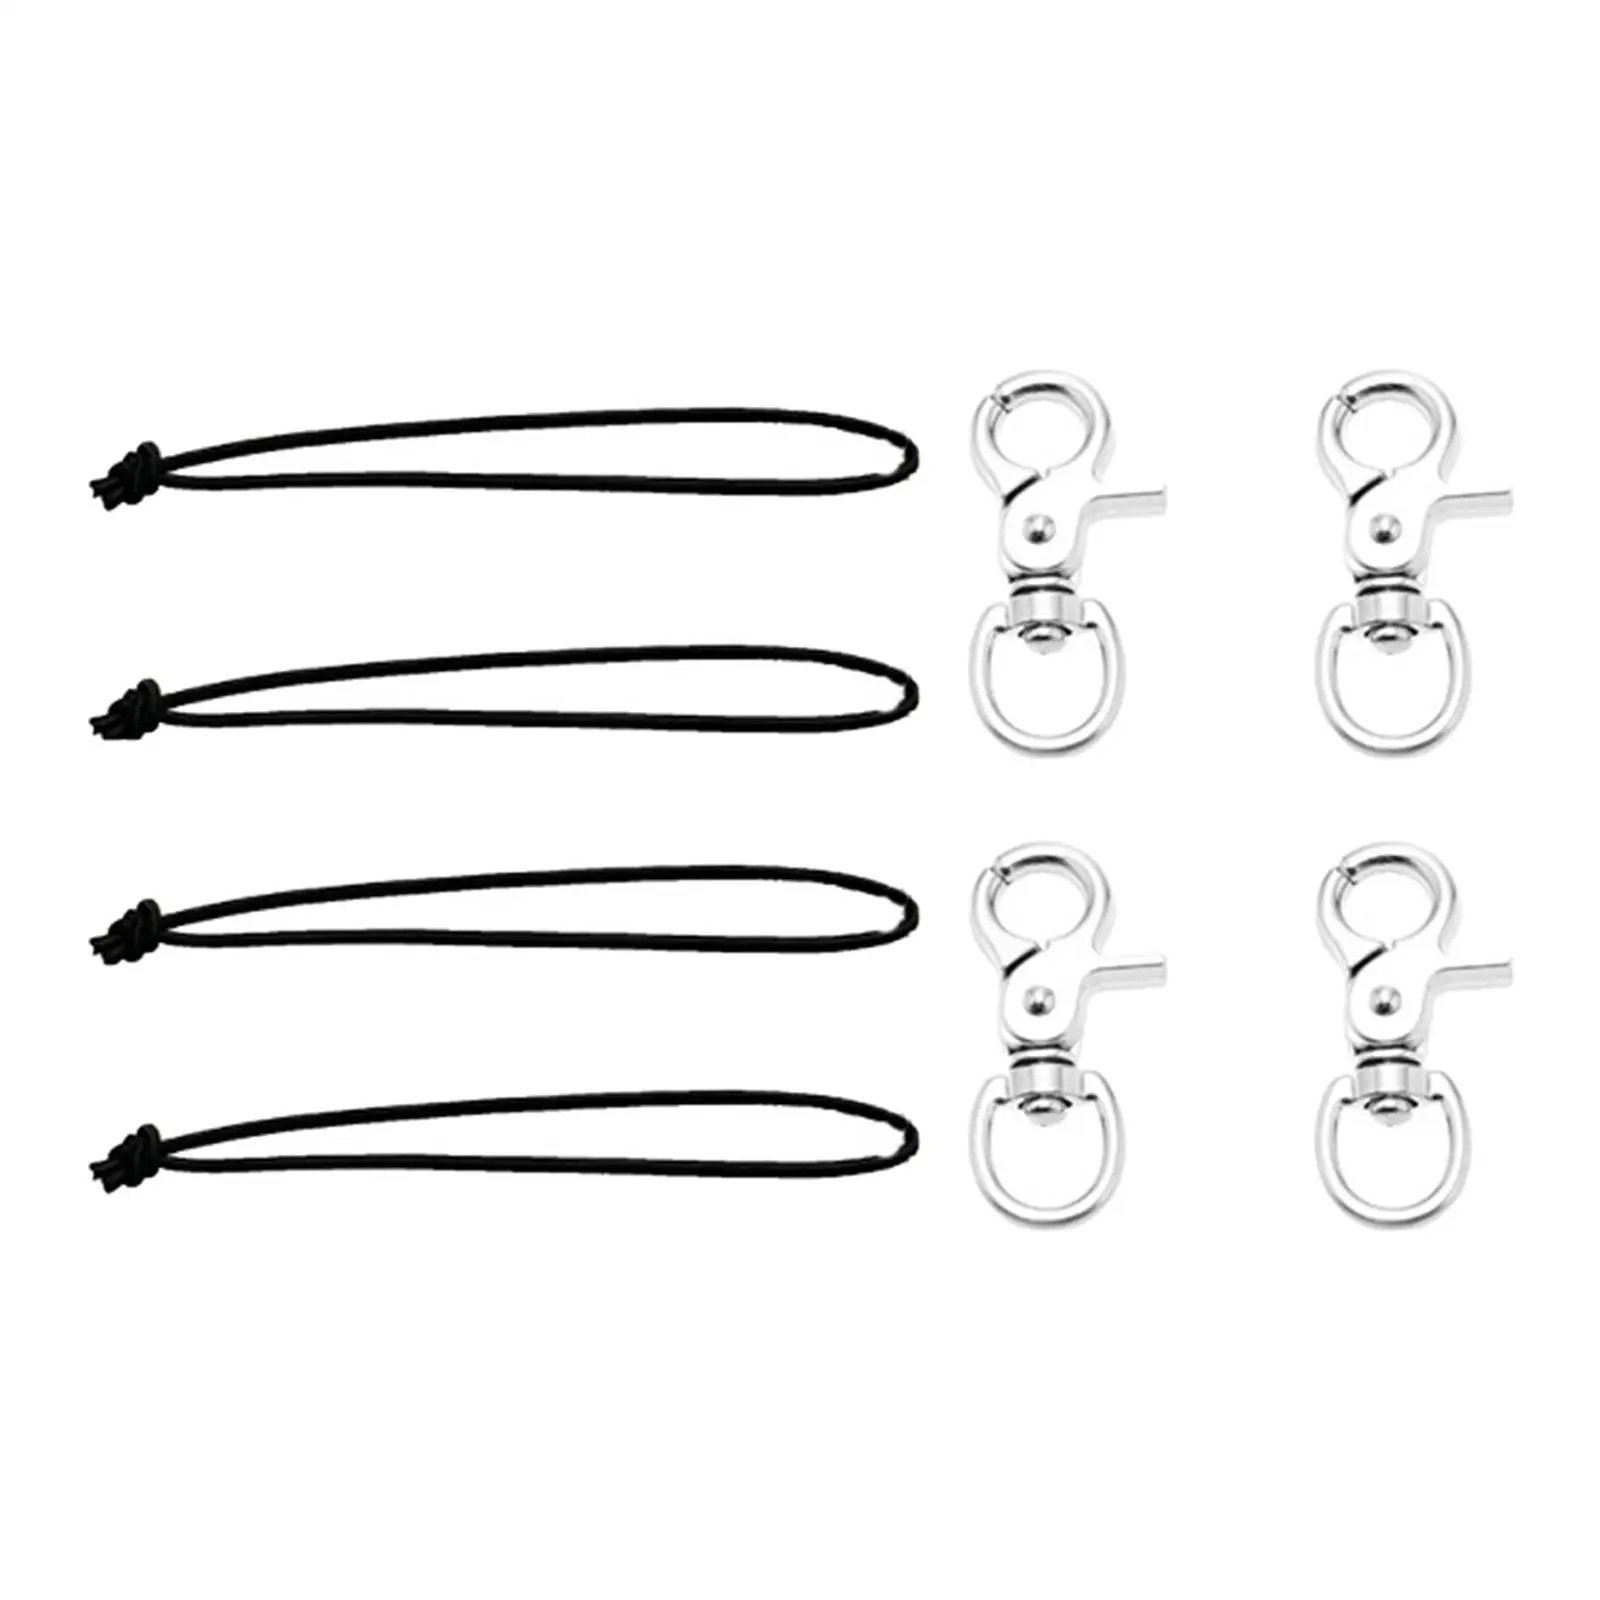 4 Pieces Skiing Snowboard Leash Cord Professional Survival Camping Strong